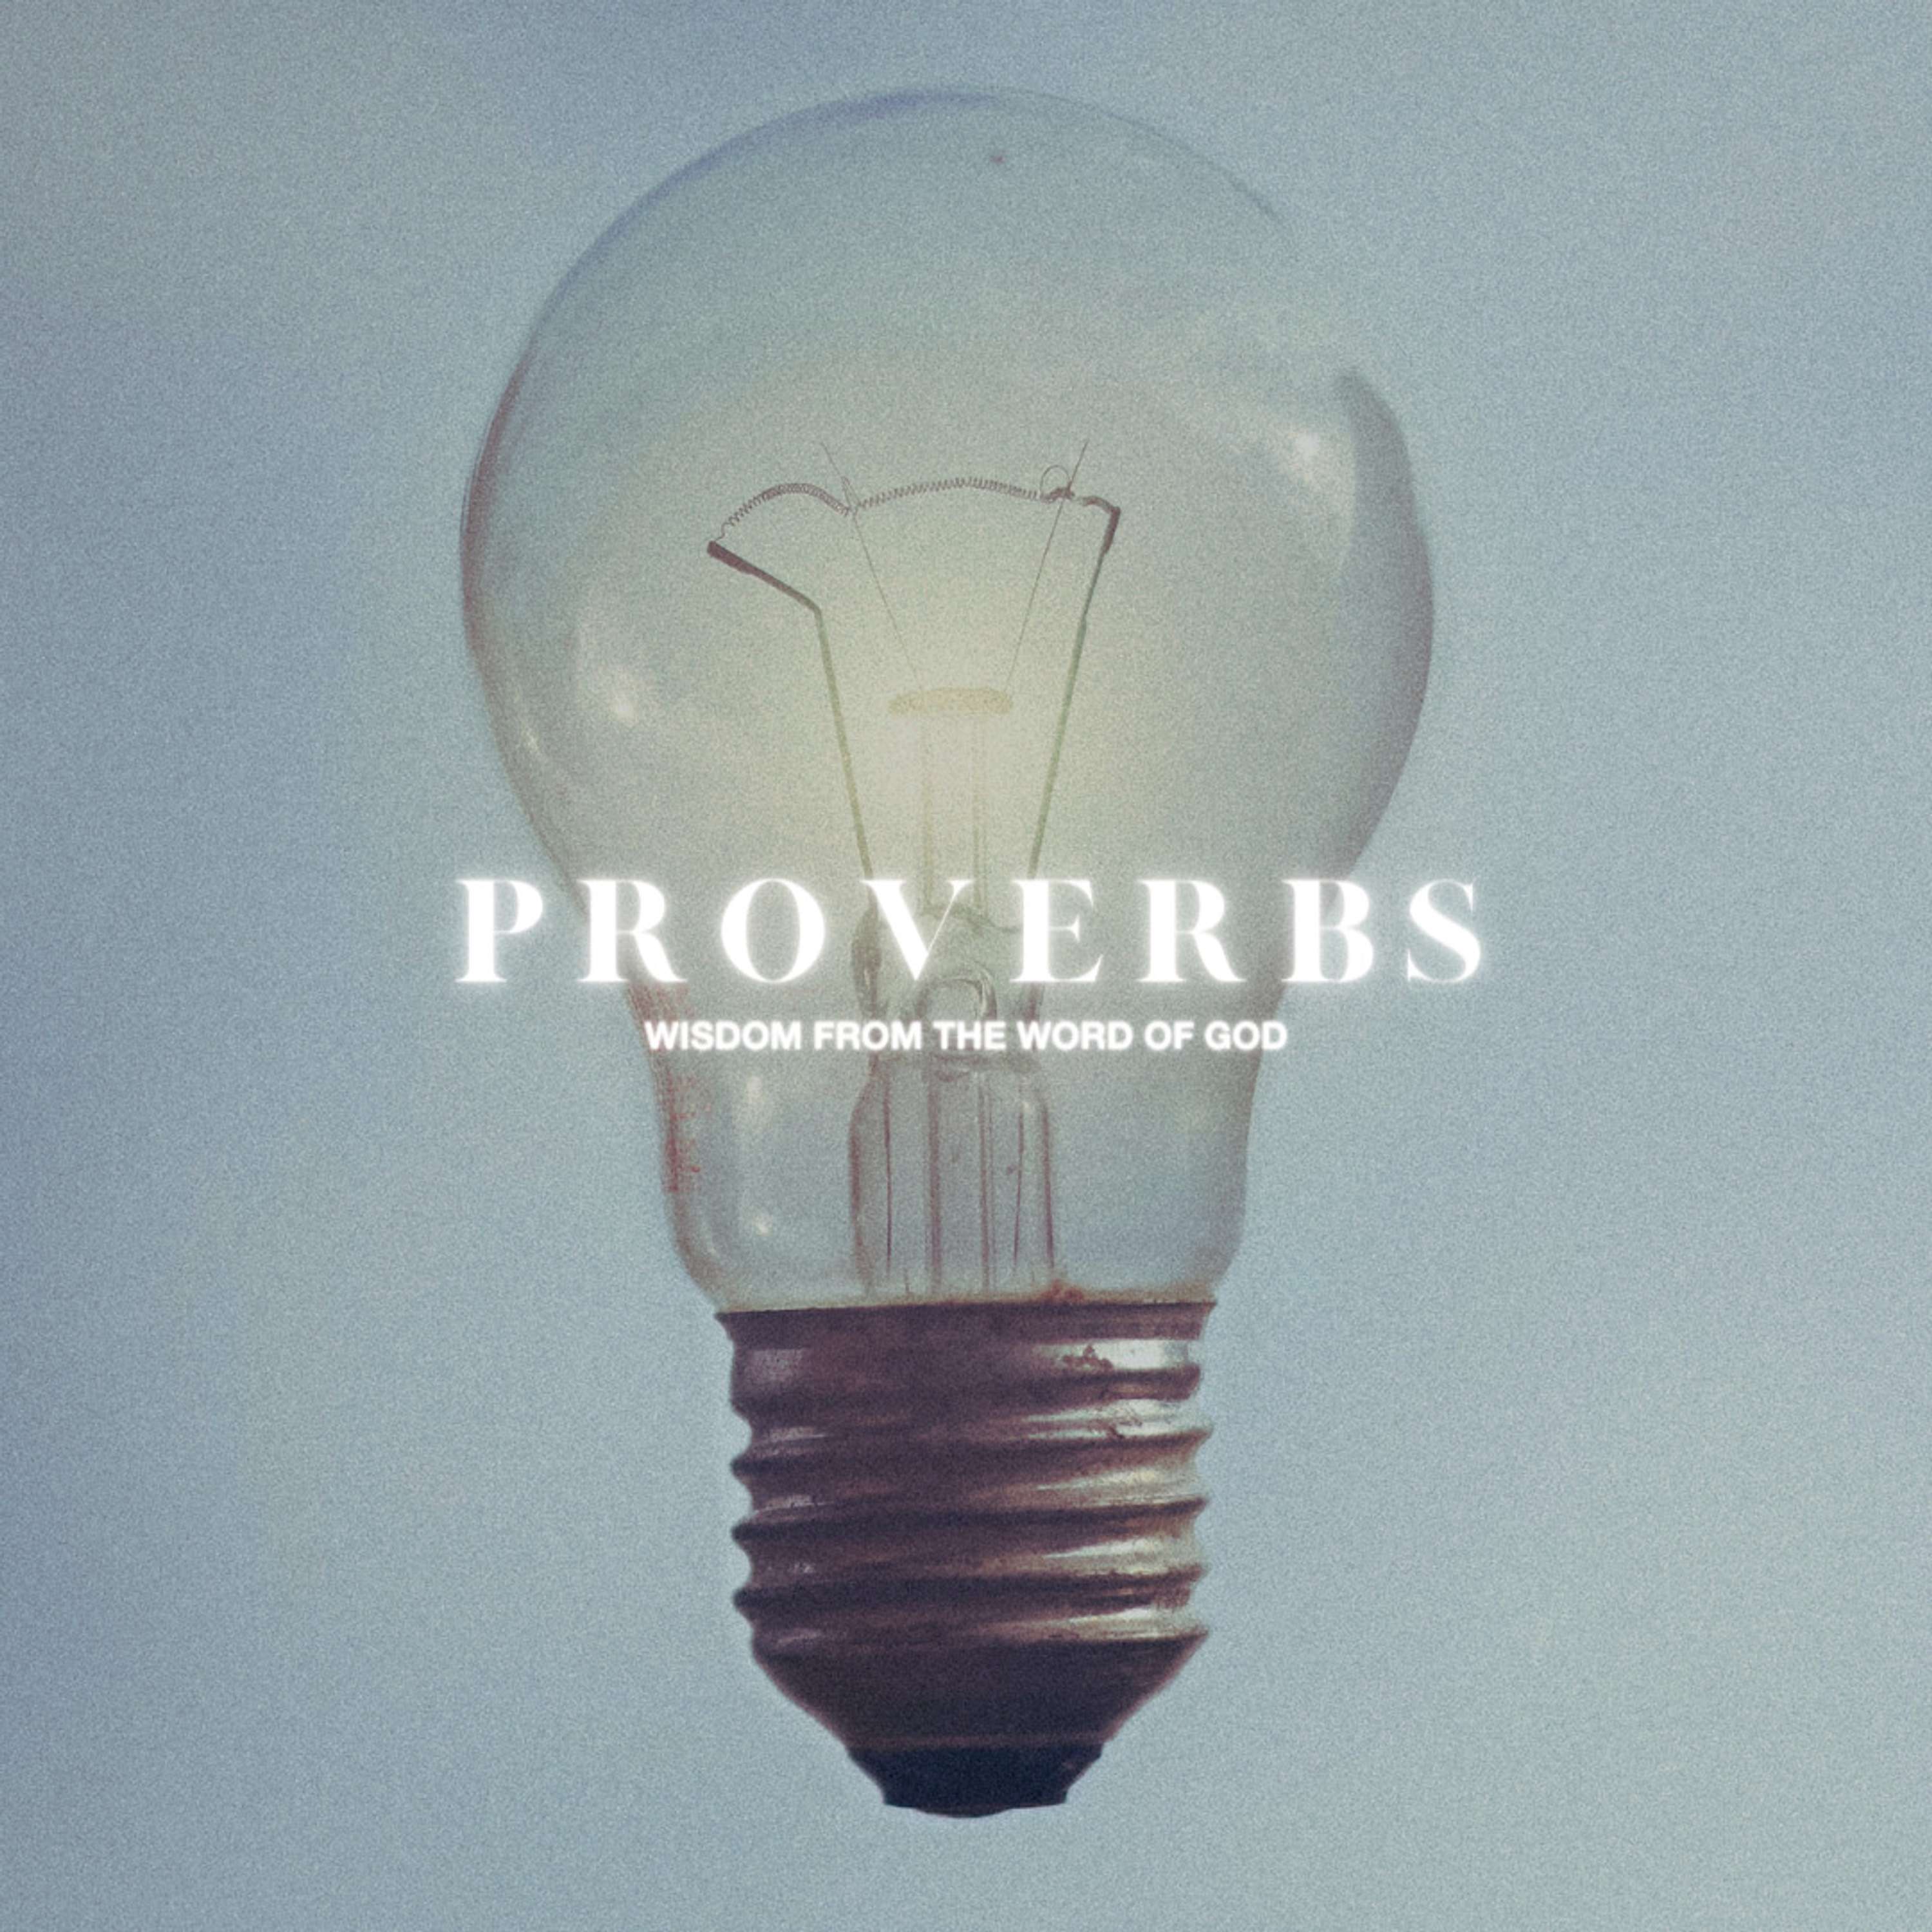 Proverbs Week 2 | Whose Voice is Louder?